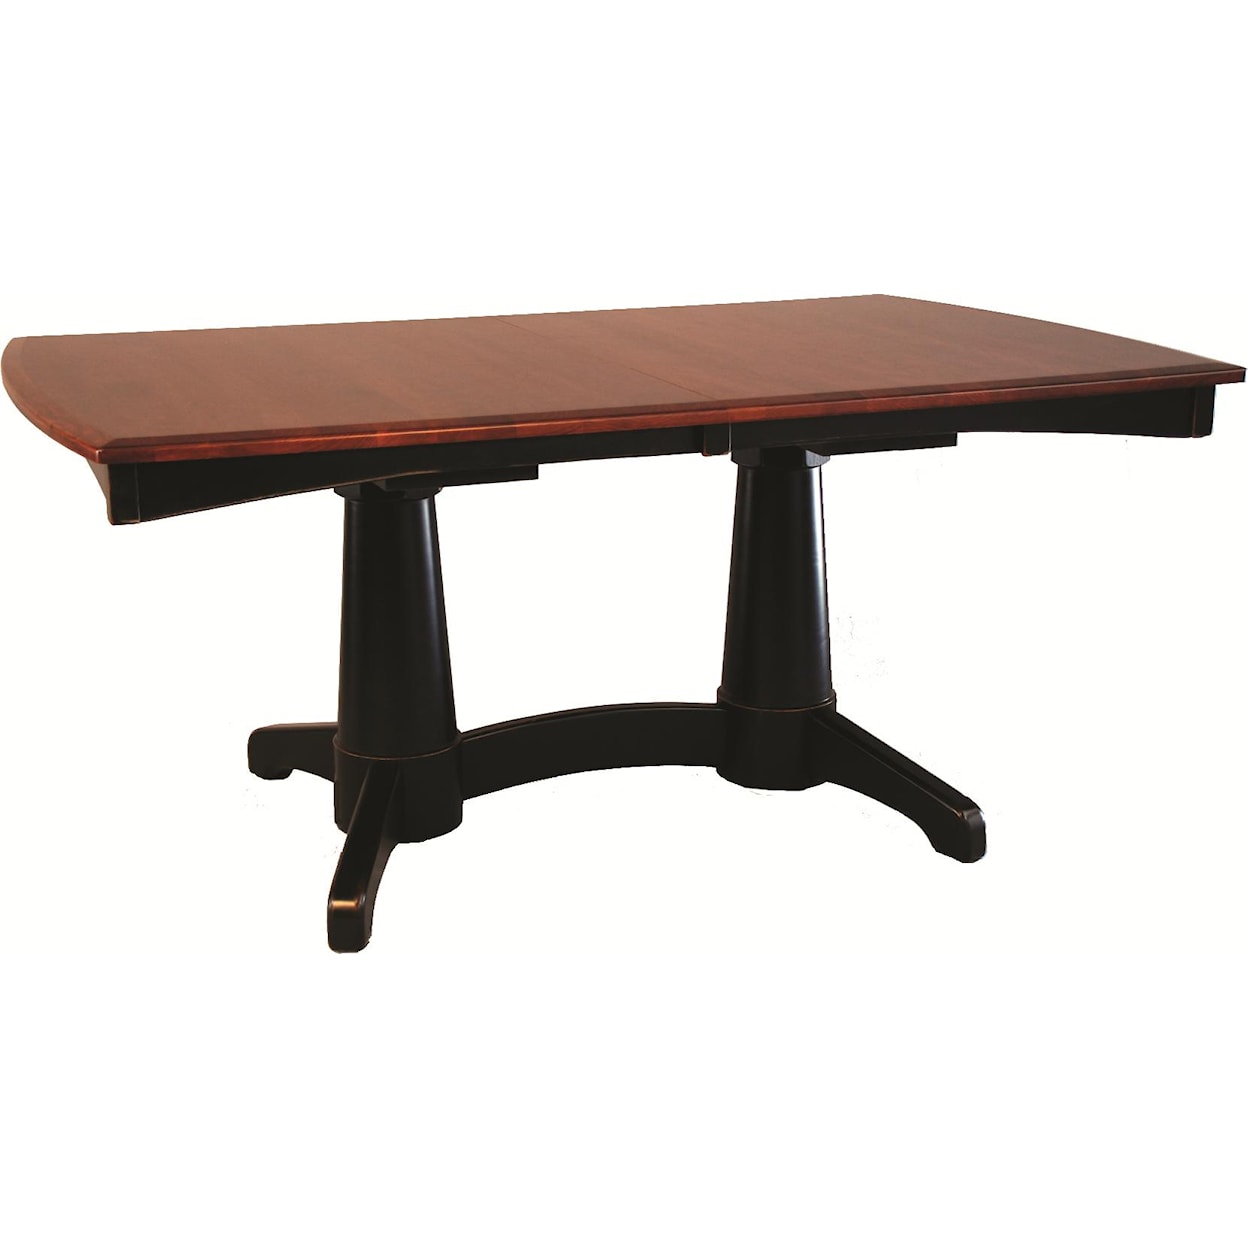 Oakwood Industries Casual Dining Lighthouse Table